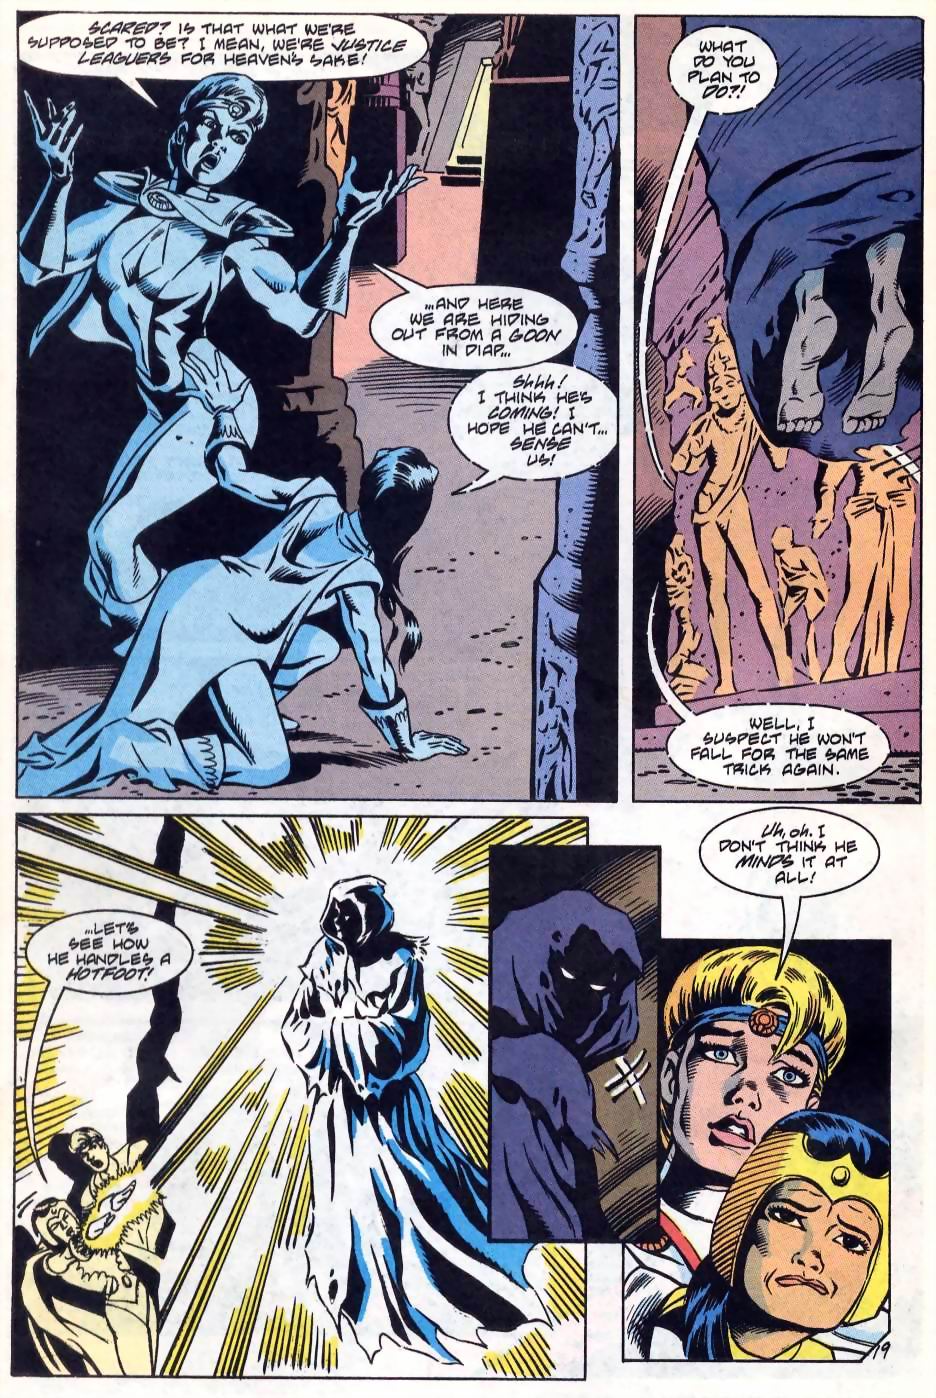 Justice League International (1993) 52 Page 19